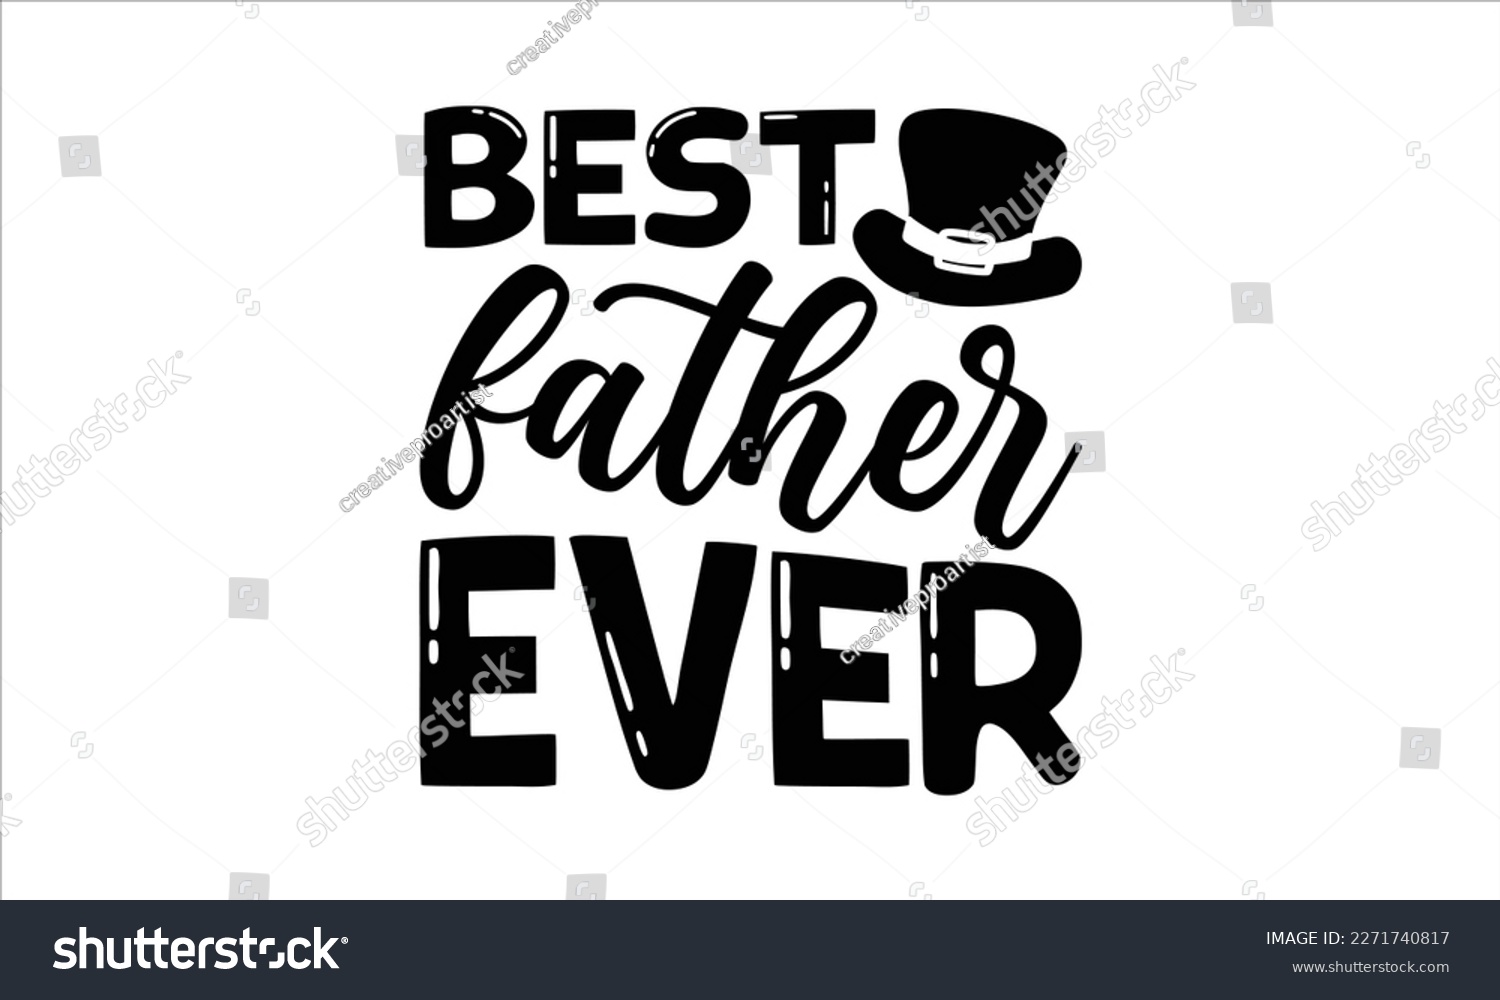 SVG of Best father ever- Father's Day svg design, Hand drawn lettering phrase isolated on white background, Illustration for prints on t-shirts and bags, posters, cards eps 10. svg